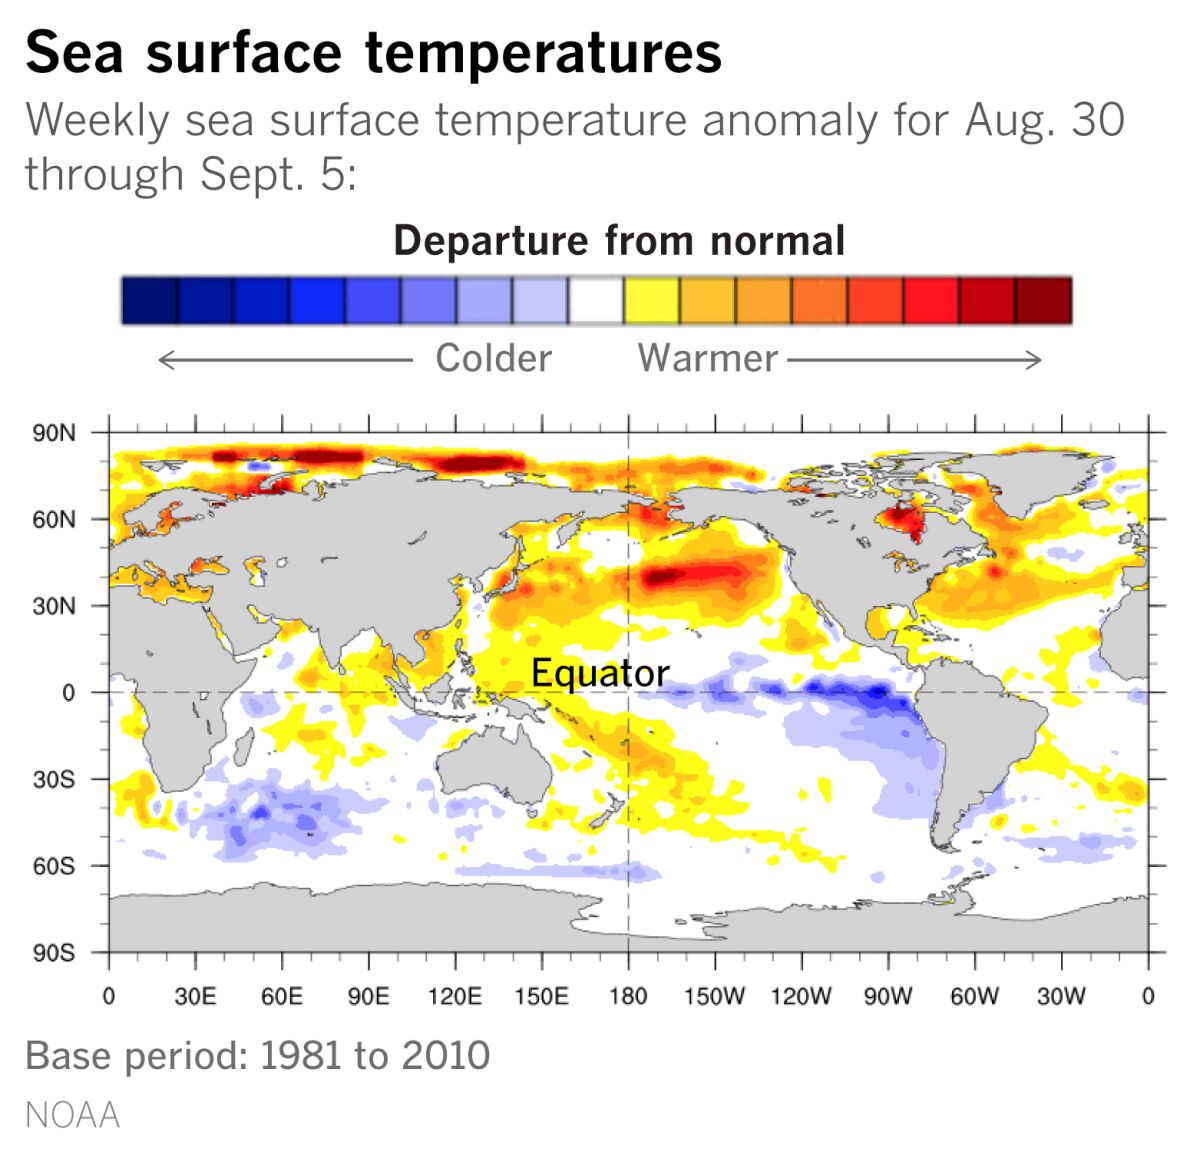 La Niña conditions have been building throughout the summer.